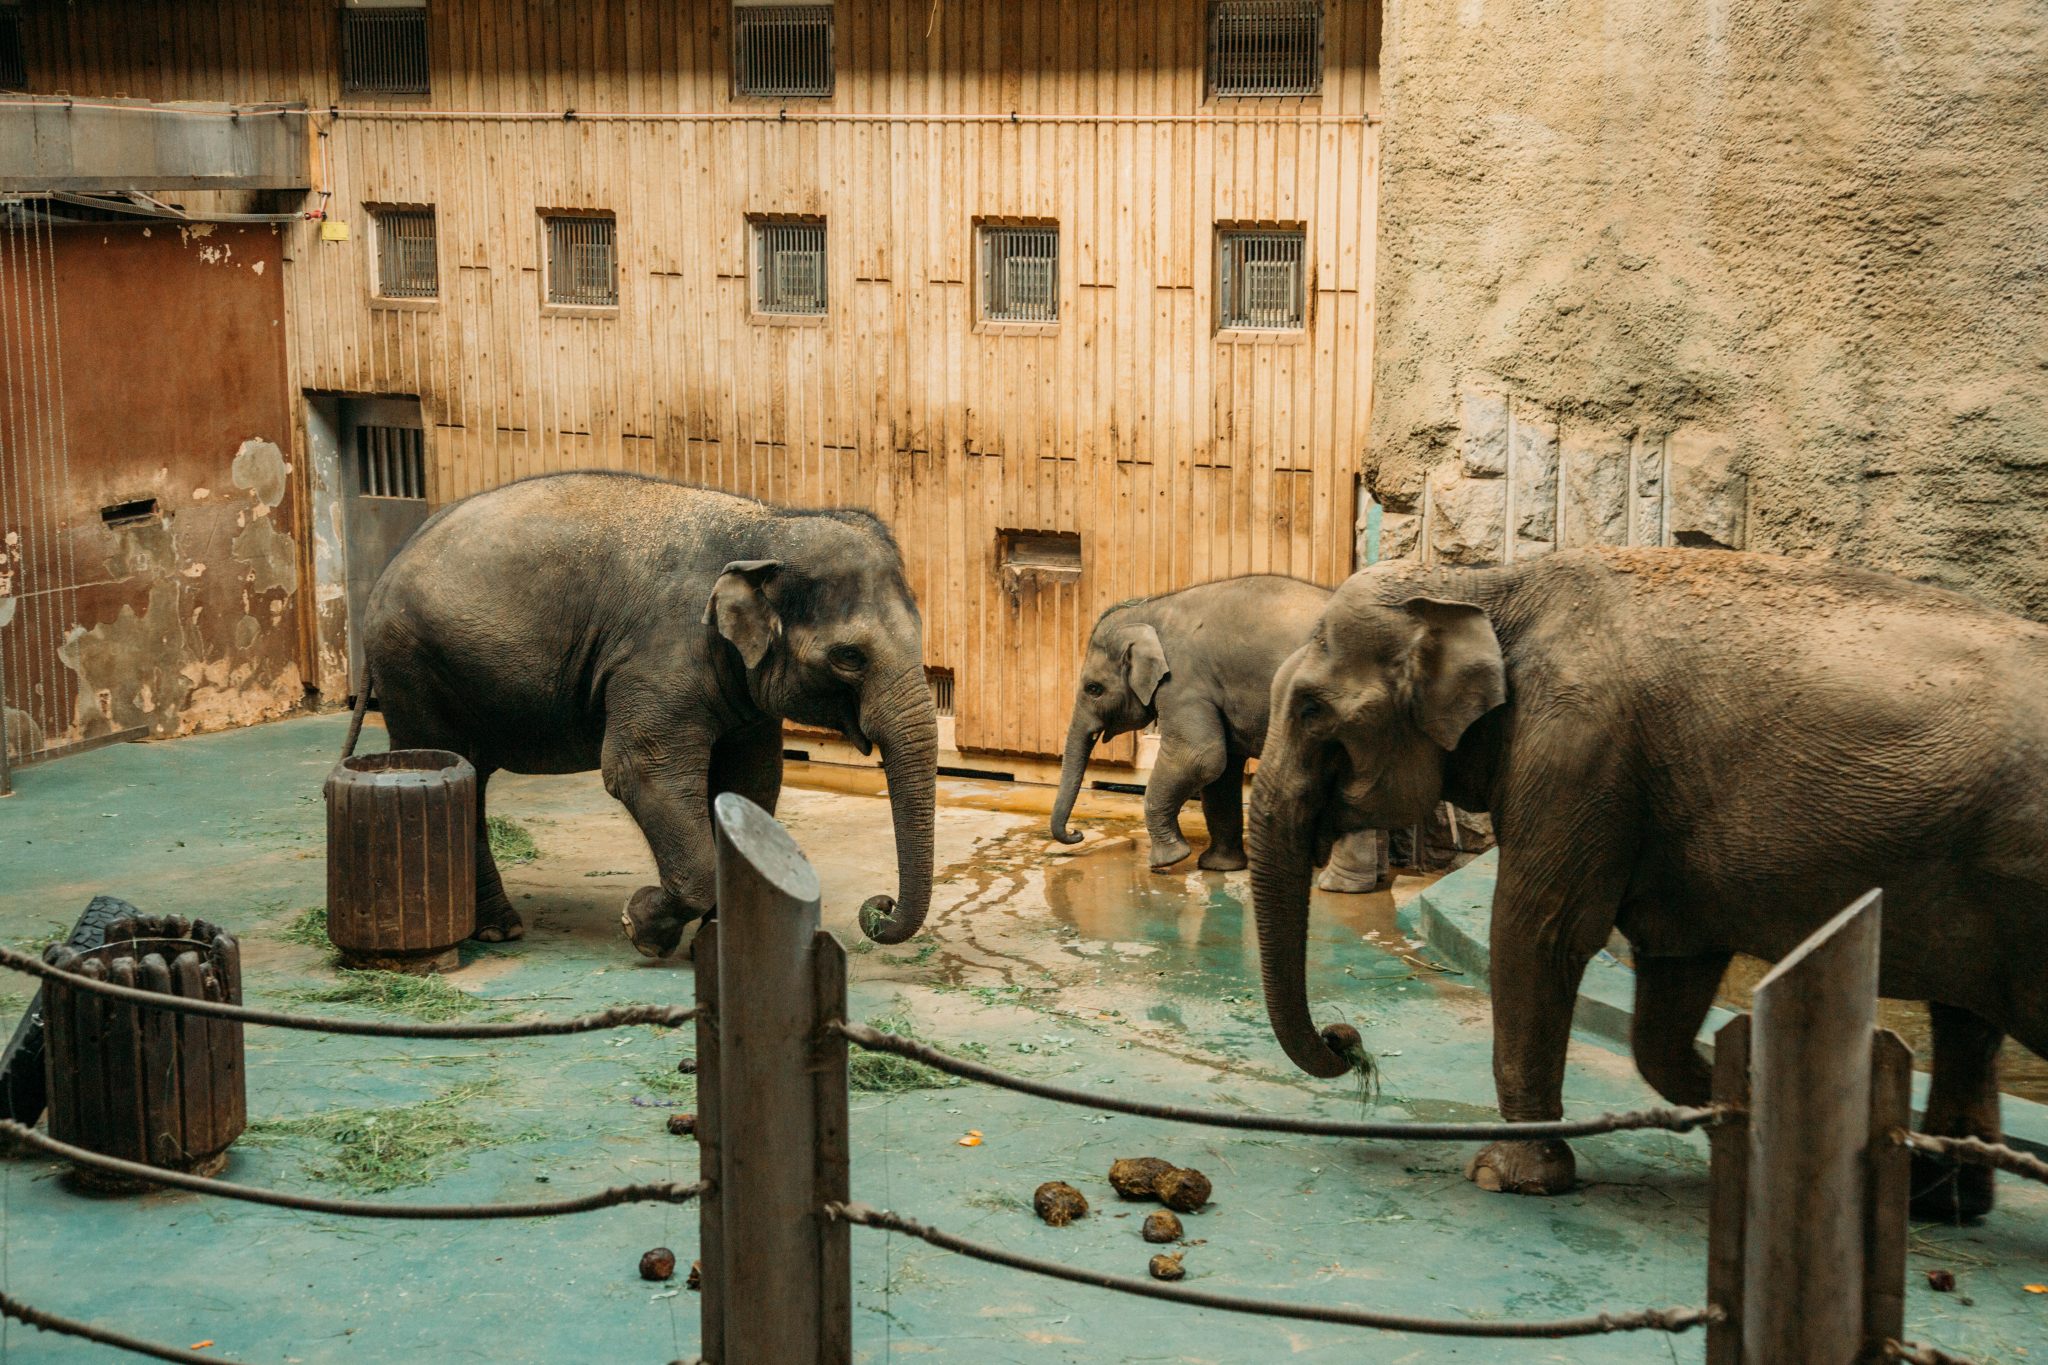 Elephants at the Moscow Zoo during their feeding time